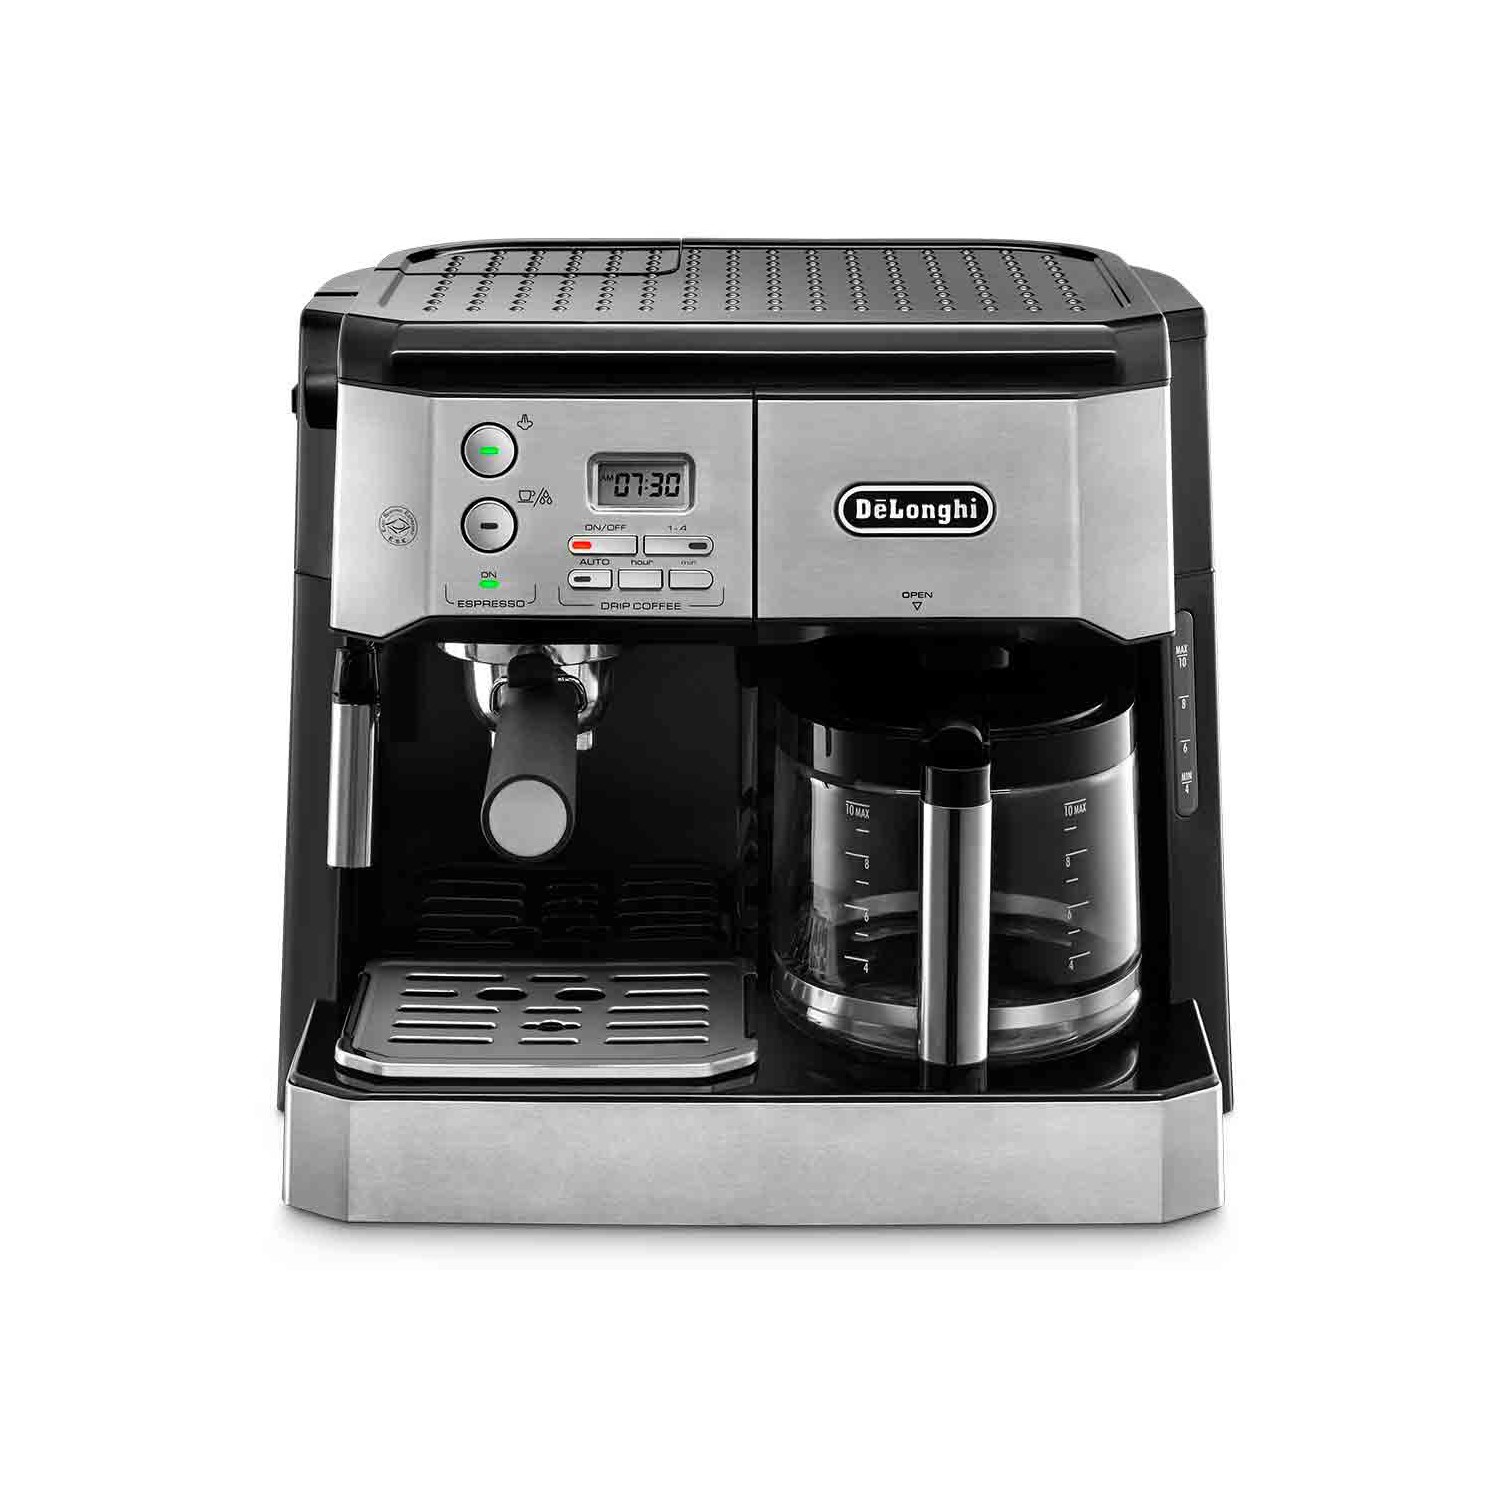 Refurbished Delonghi BCO431.S Combined Espresso & Filter Coffee Machine Stainless Steel